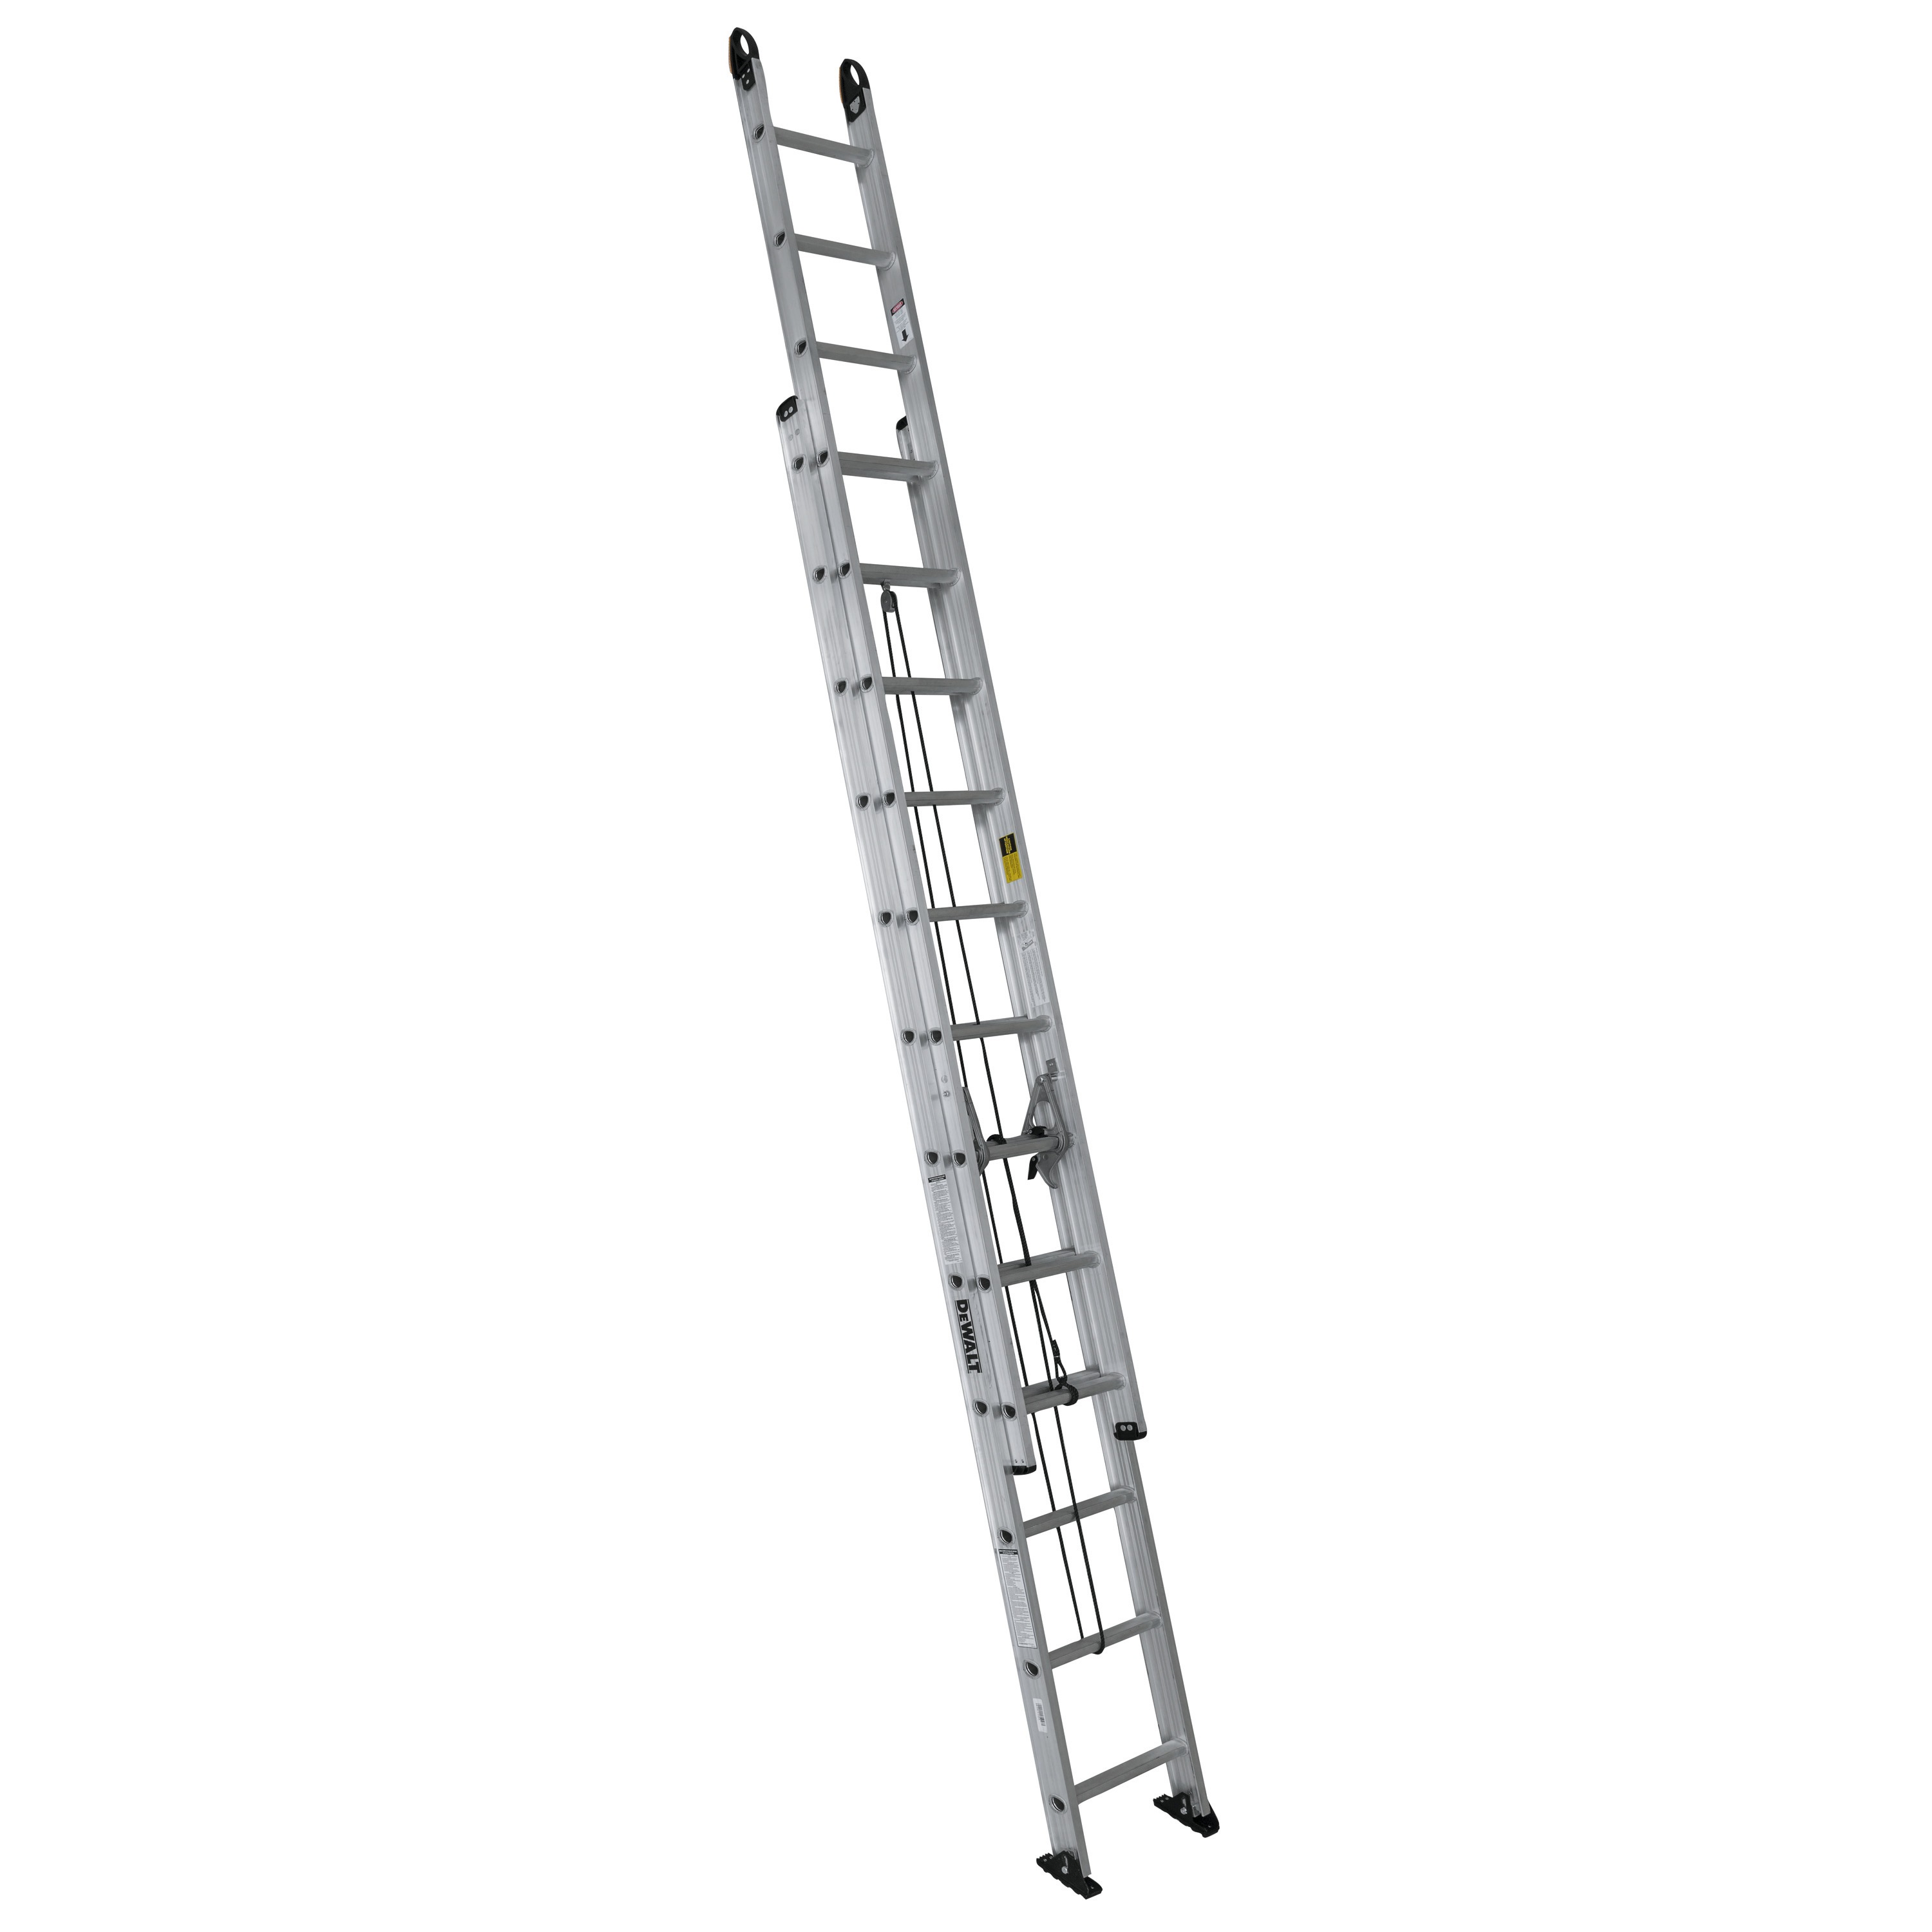 24 foot Aluminum 250 pound Type 1 Extension Ladder.